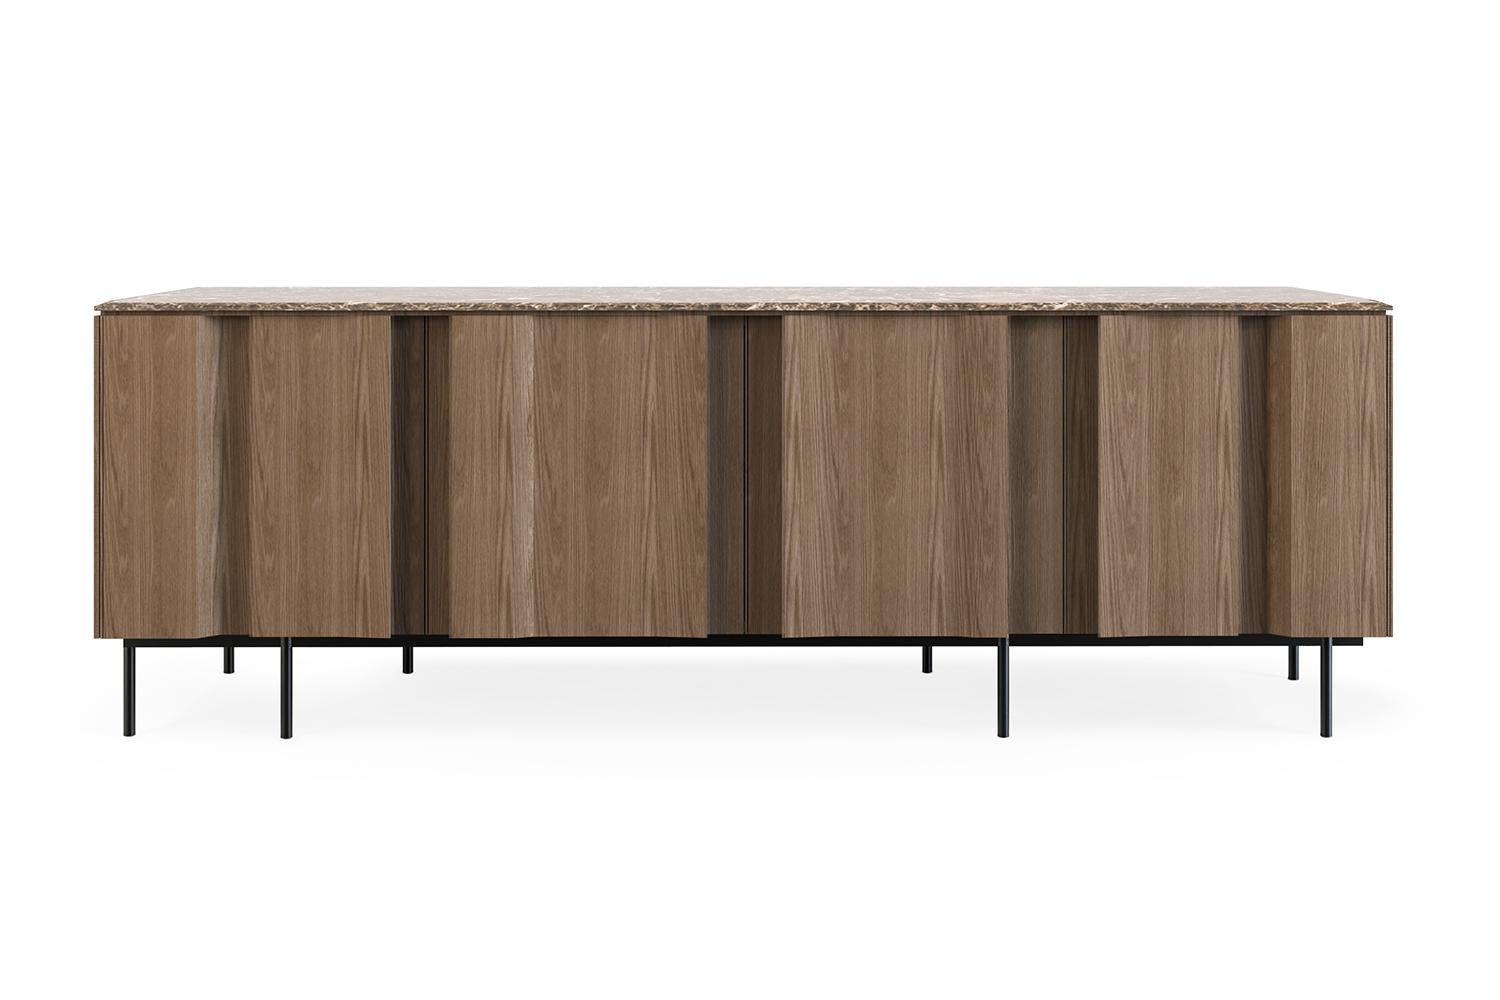 Bryant sideboard by Collector
Materials: Marble top. Oak wooden doors and structure. Legs in metal with a painted finish. Lacquered interior.
Dimensions: W 202 x D 50 x H 72 cm 
Also available in walnut.

A series of vertical lines runs from top to